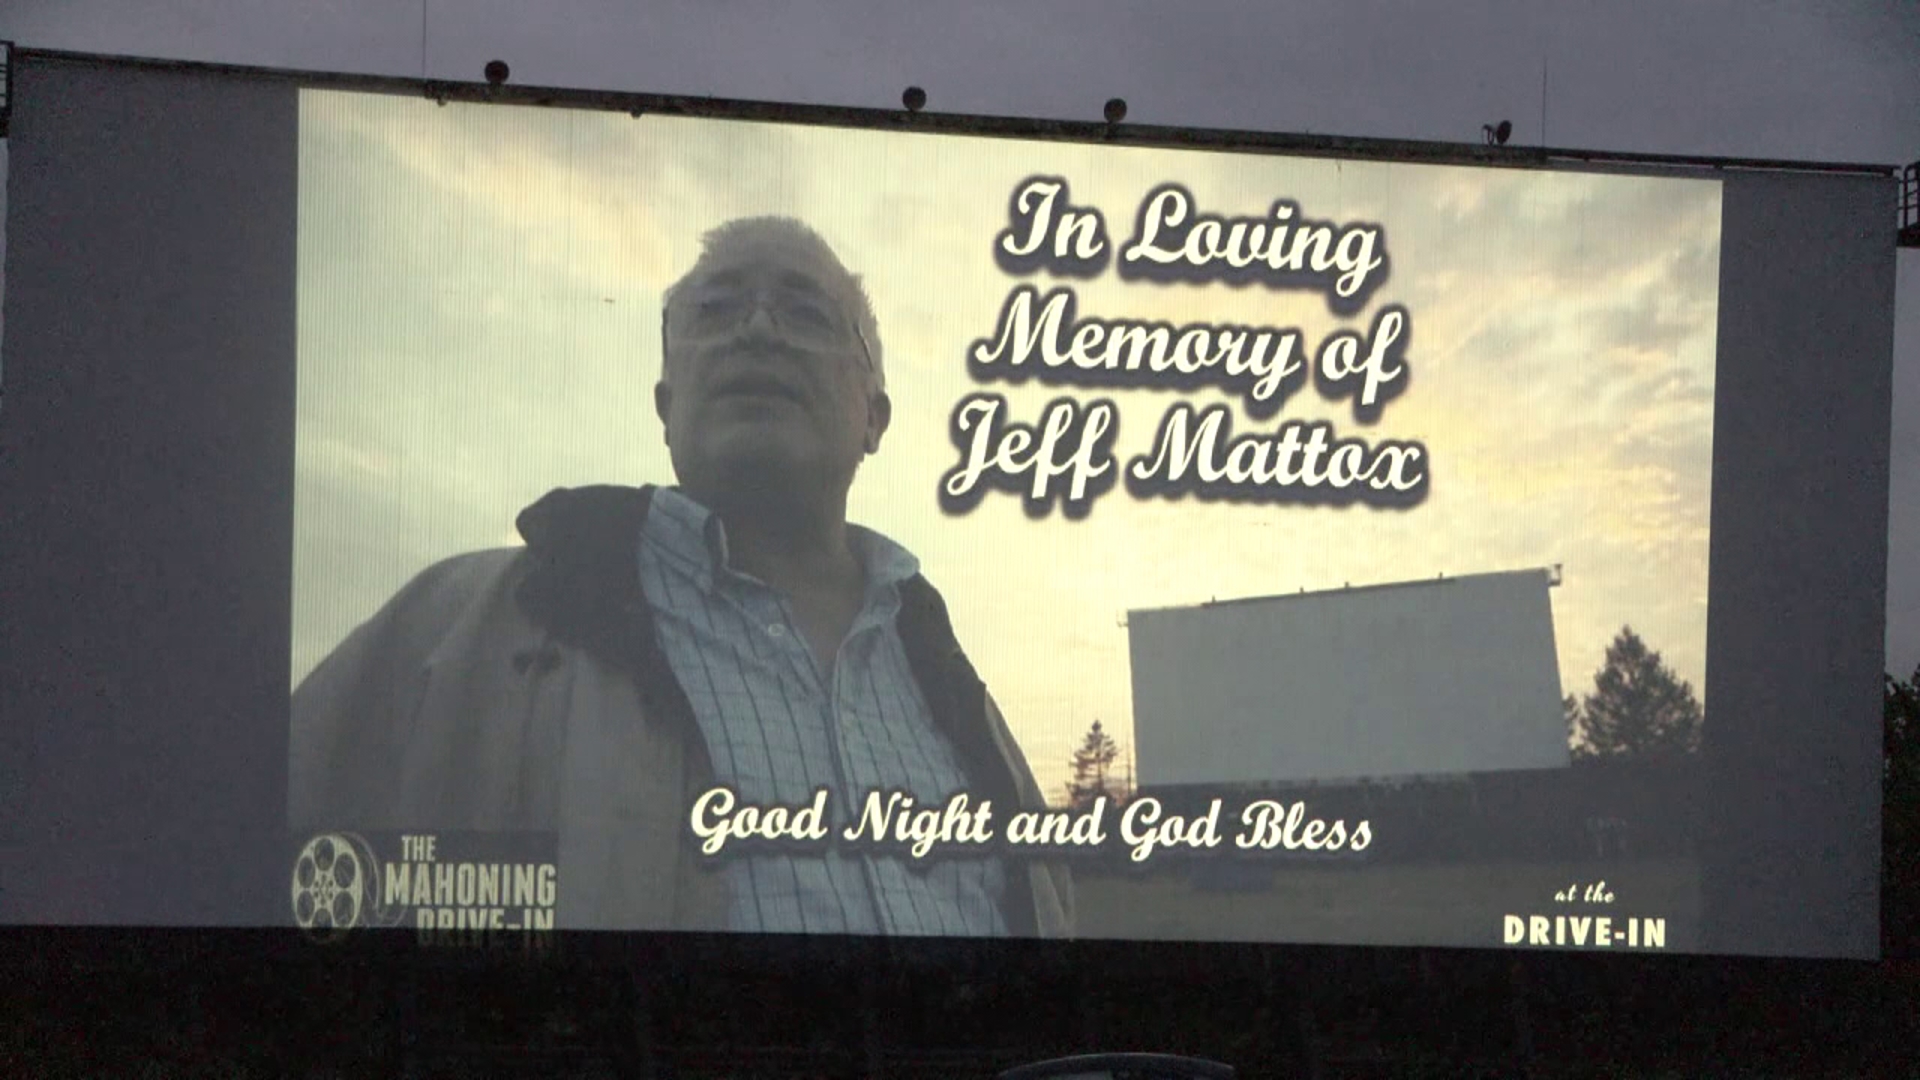 Movie fans drove hours for opening night at the Mahoning Drive-In Theater; it was the first showing after its most recent owner passed away suddenly.